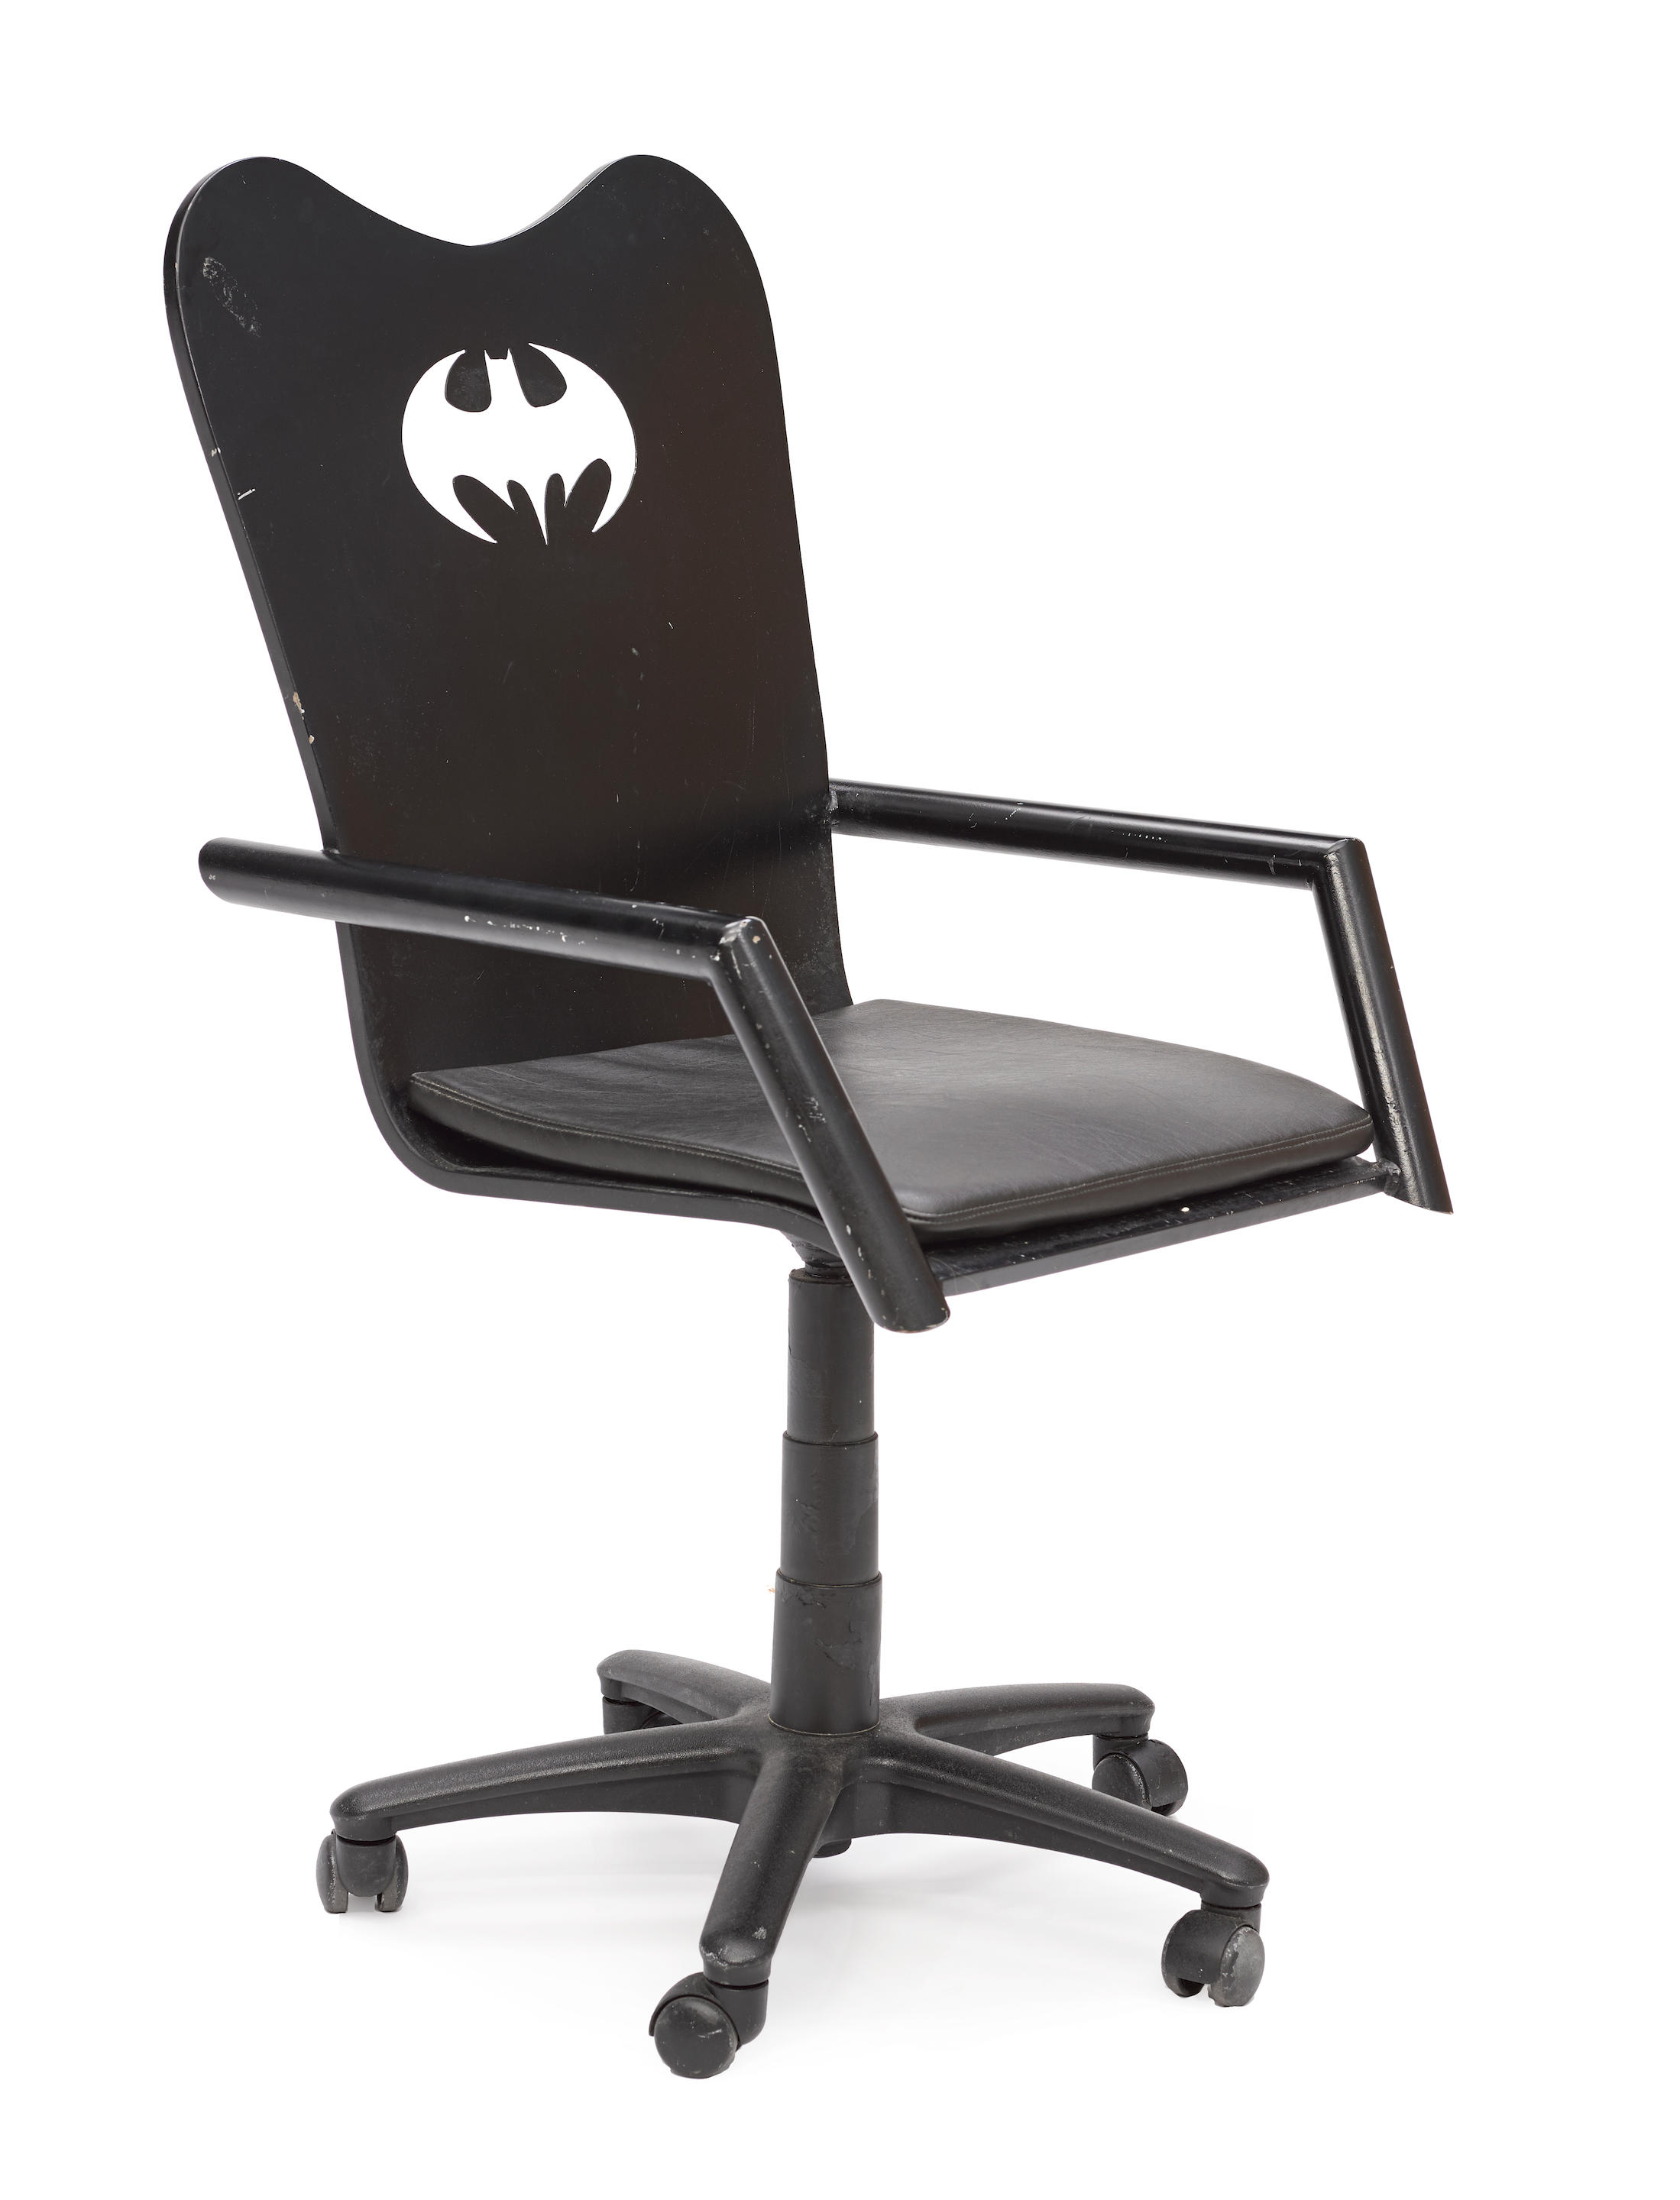 A Bat Symbol chair from the Batcave in Batman and Robin